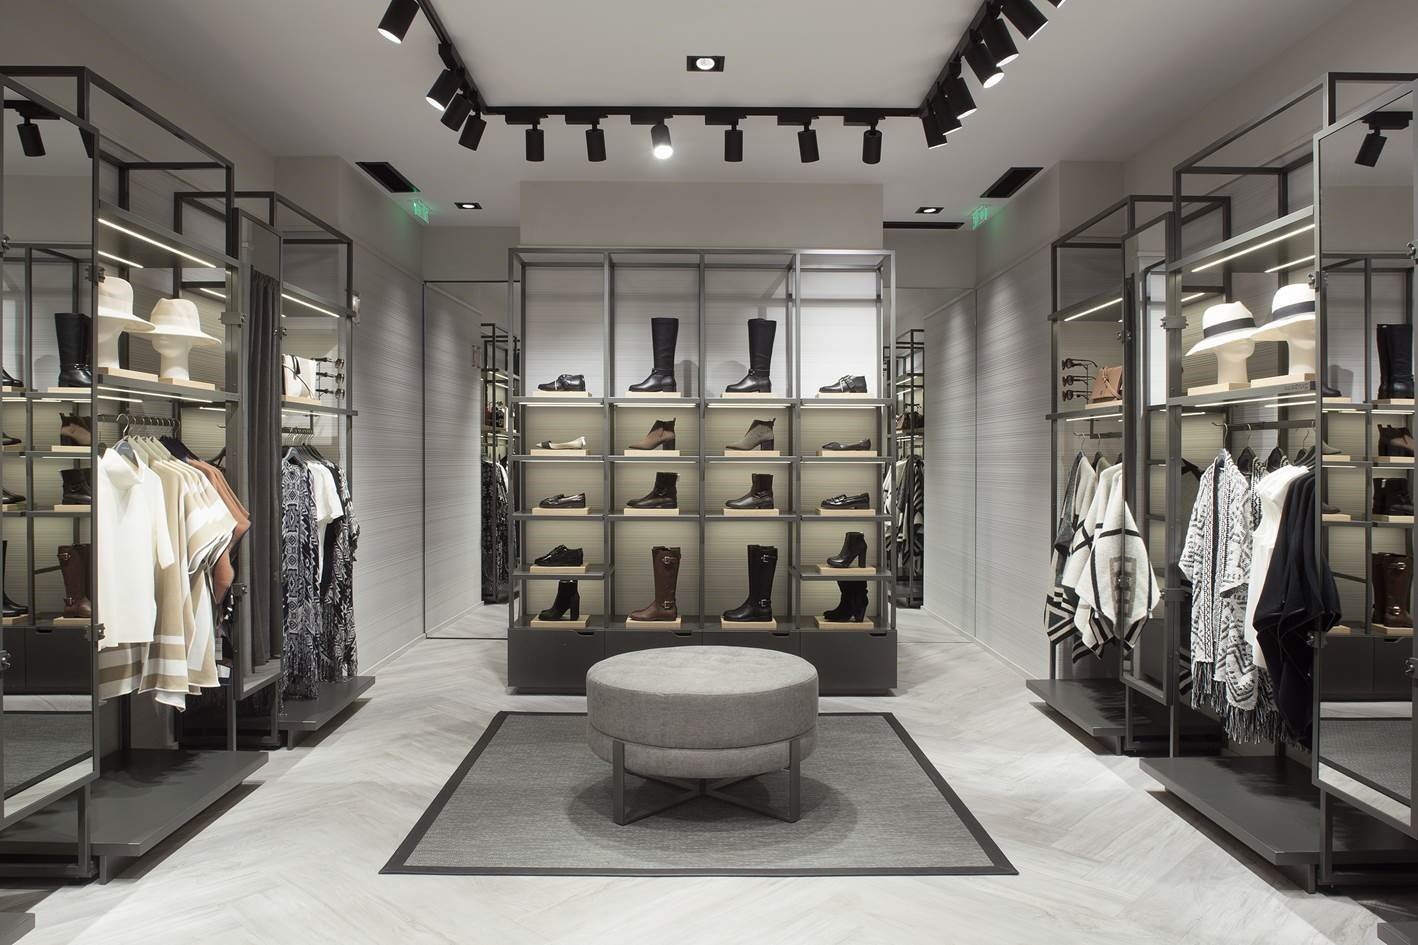 Image of a clothing store interior from Registered Community Design 3023381-0002